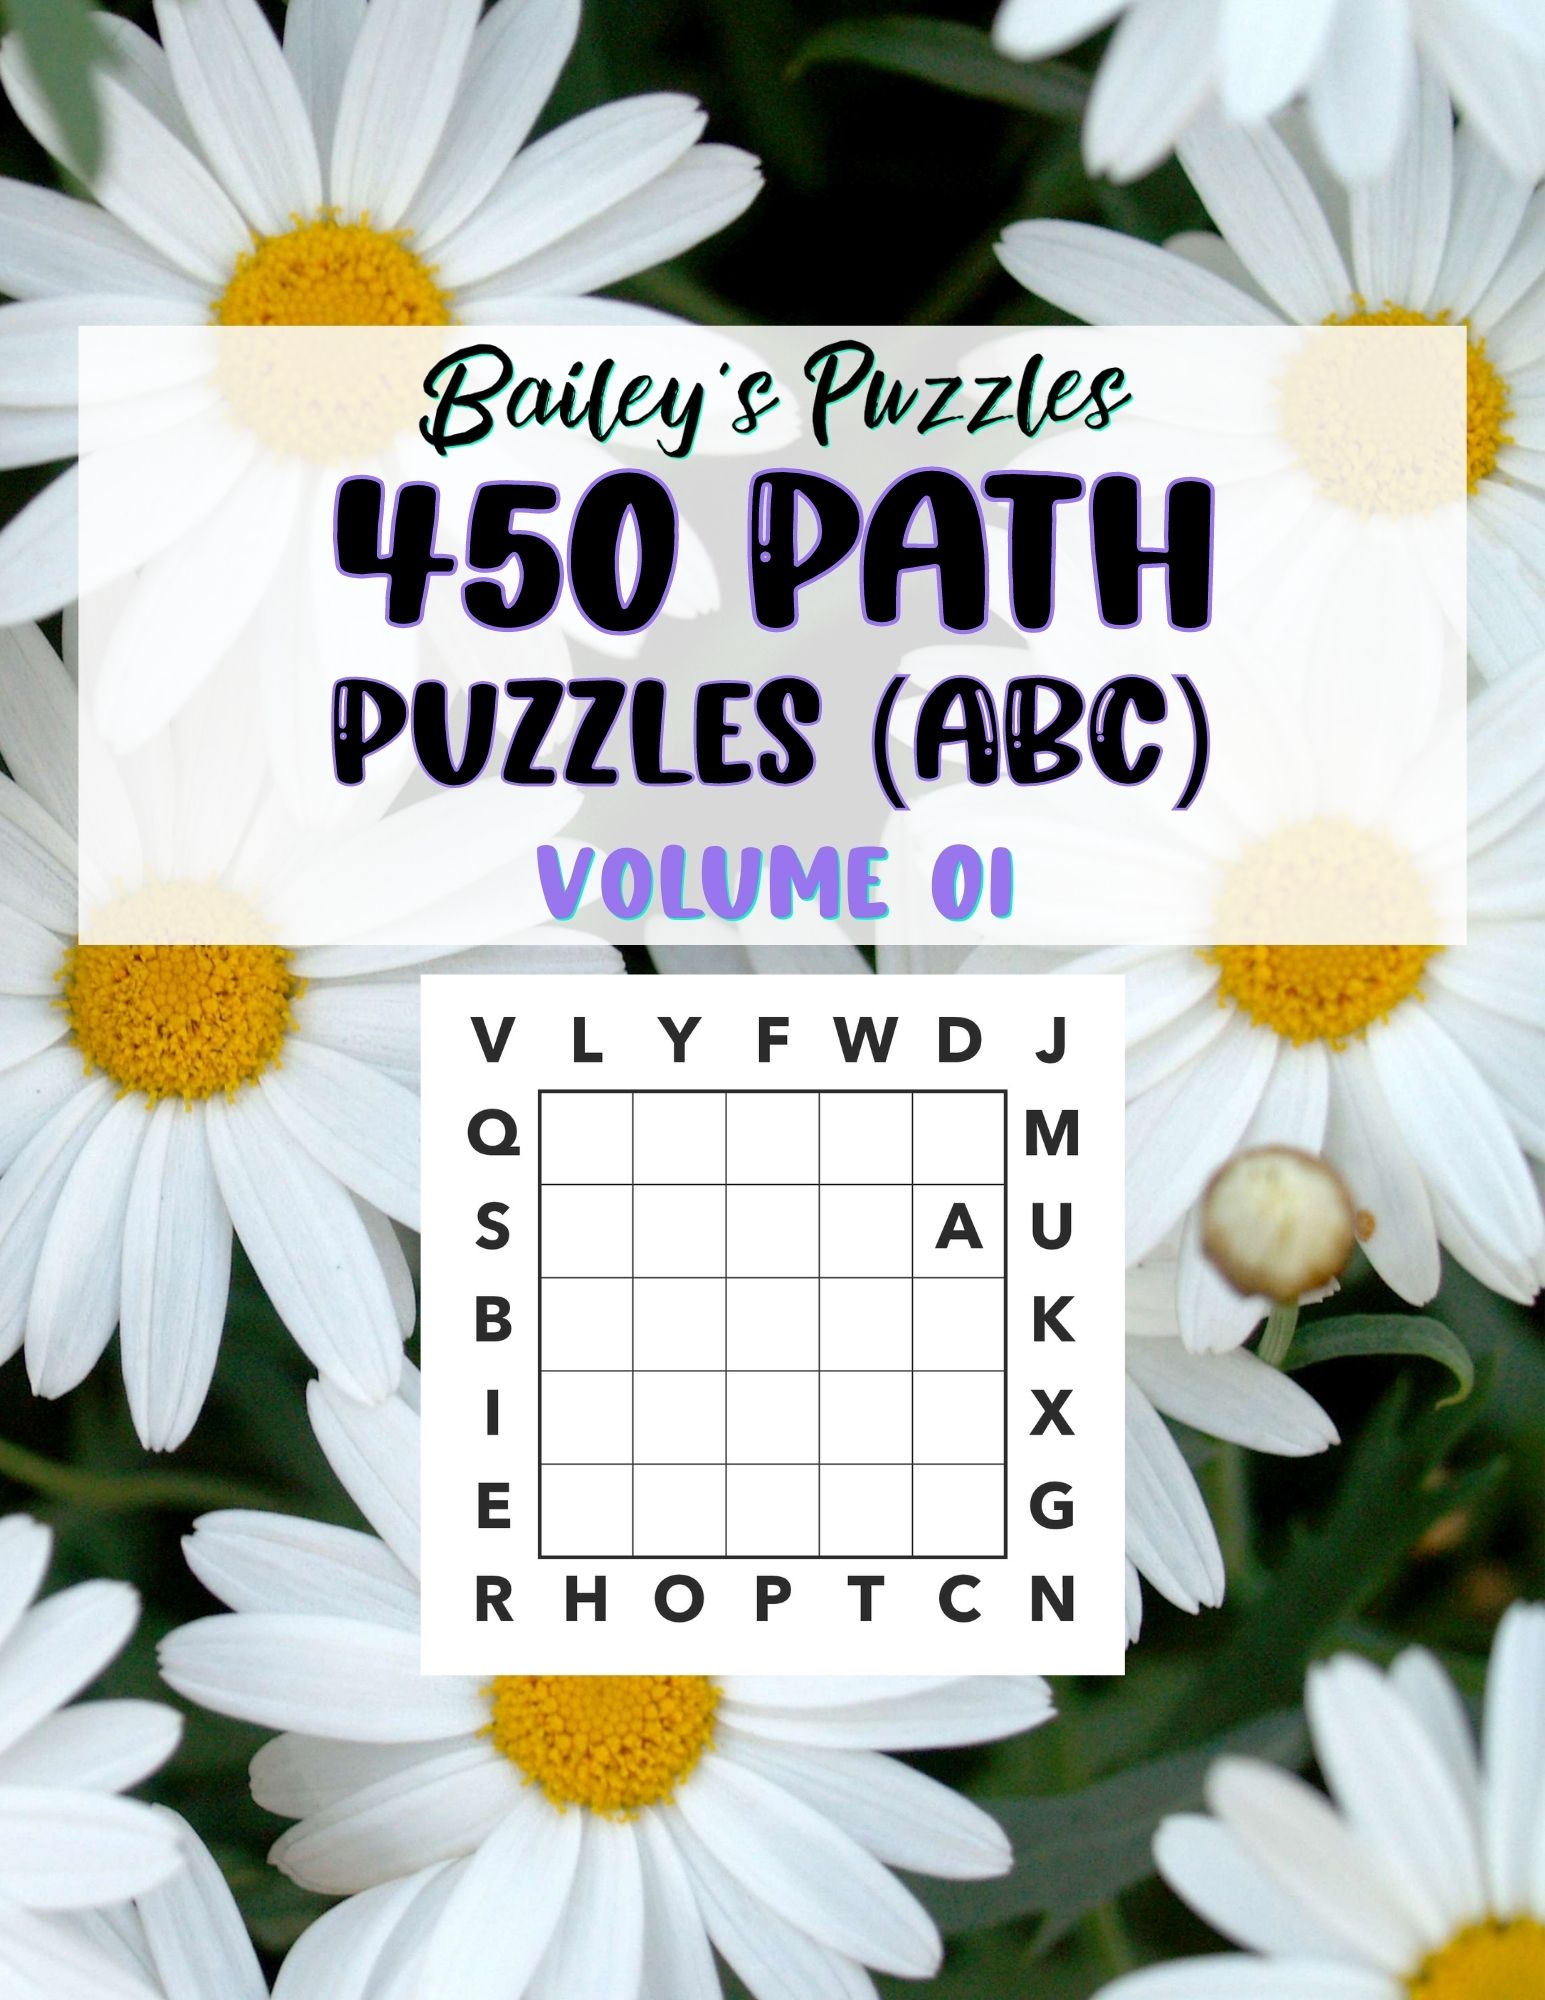 Front Cover - 450 Path Puzzles (ABC) volume 01